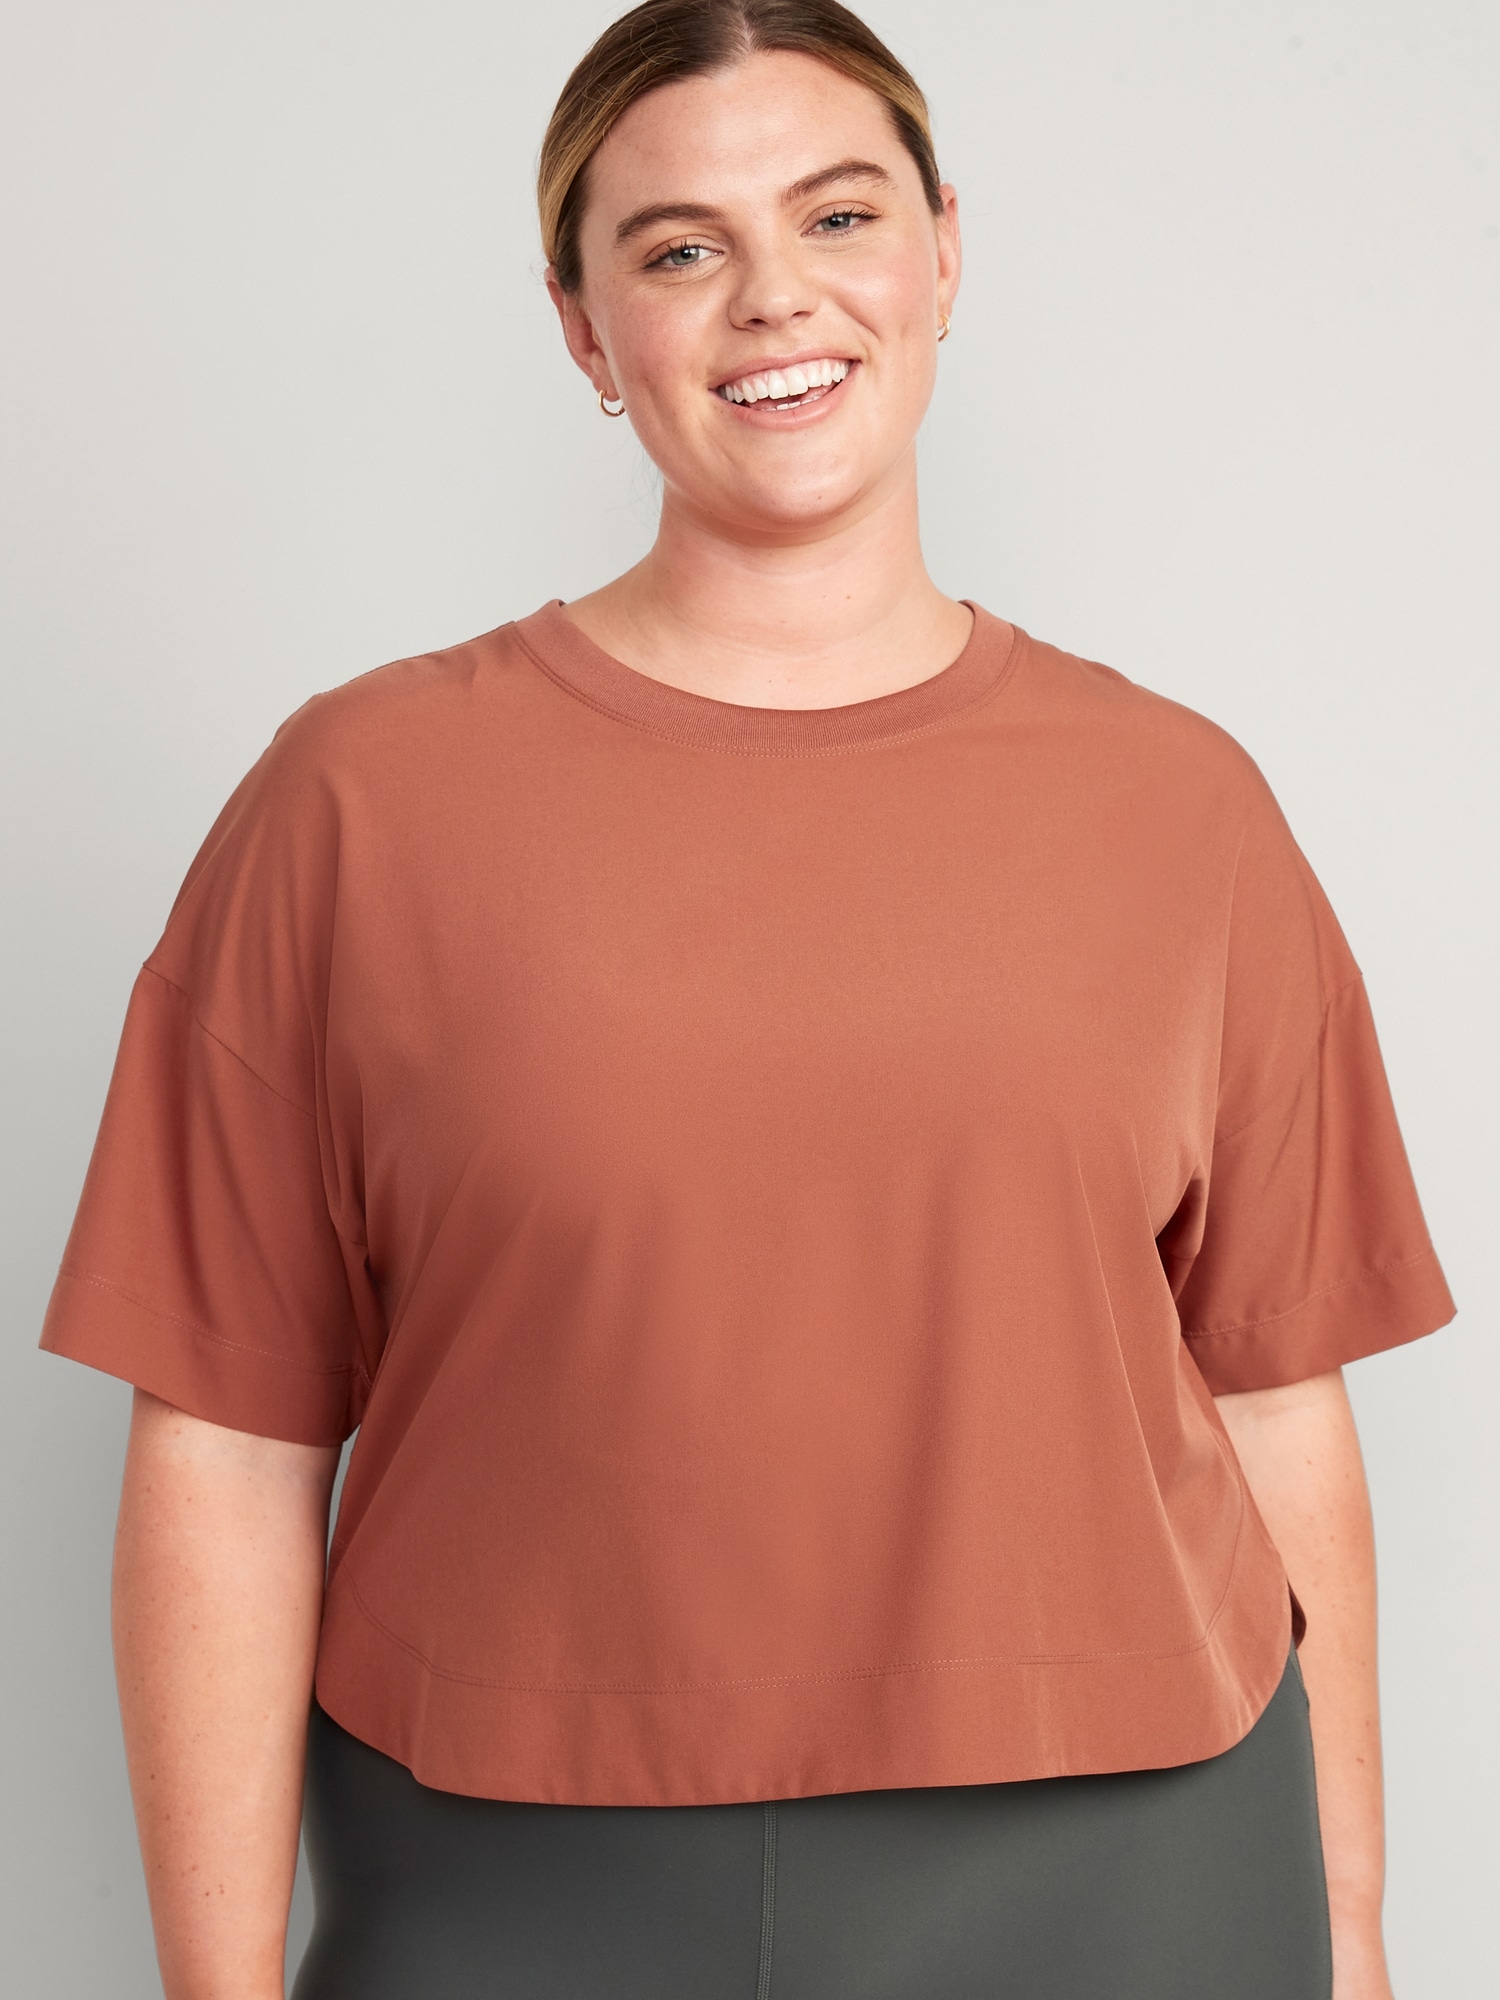 StretchTech Cropped T-Shirt | Old Navy for Women